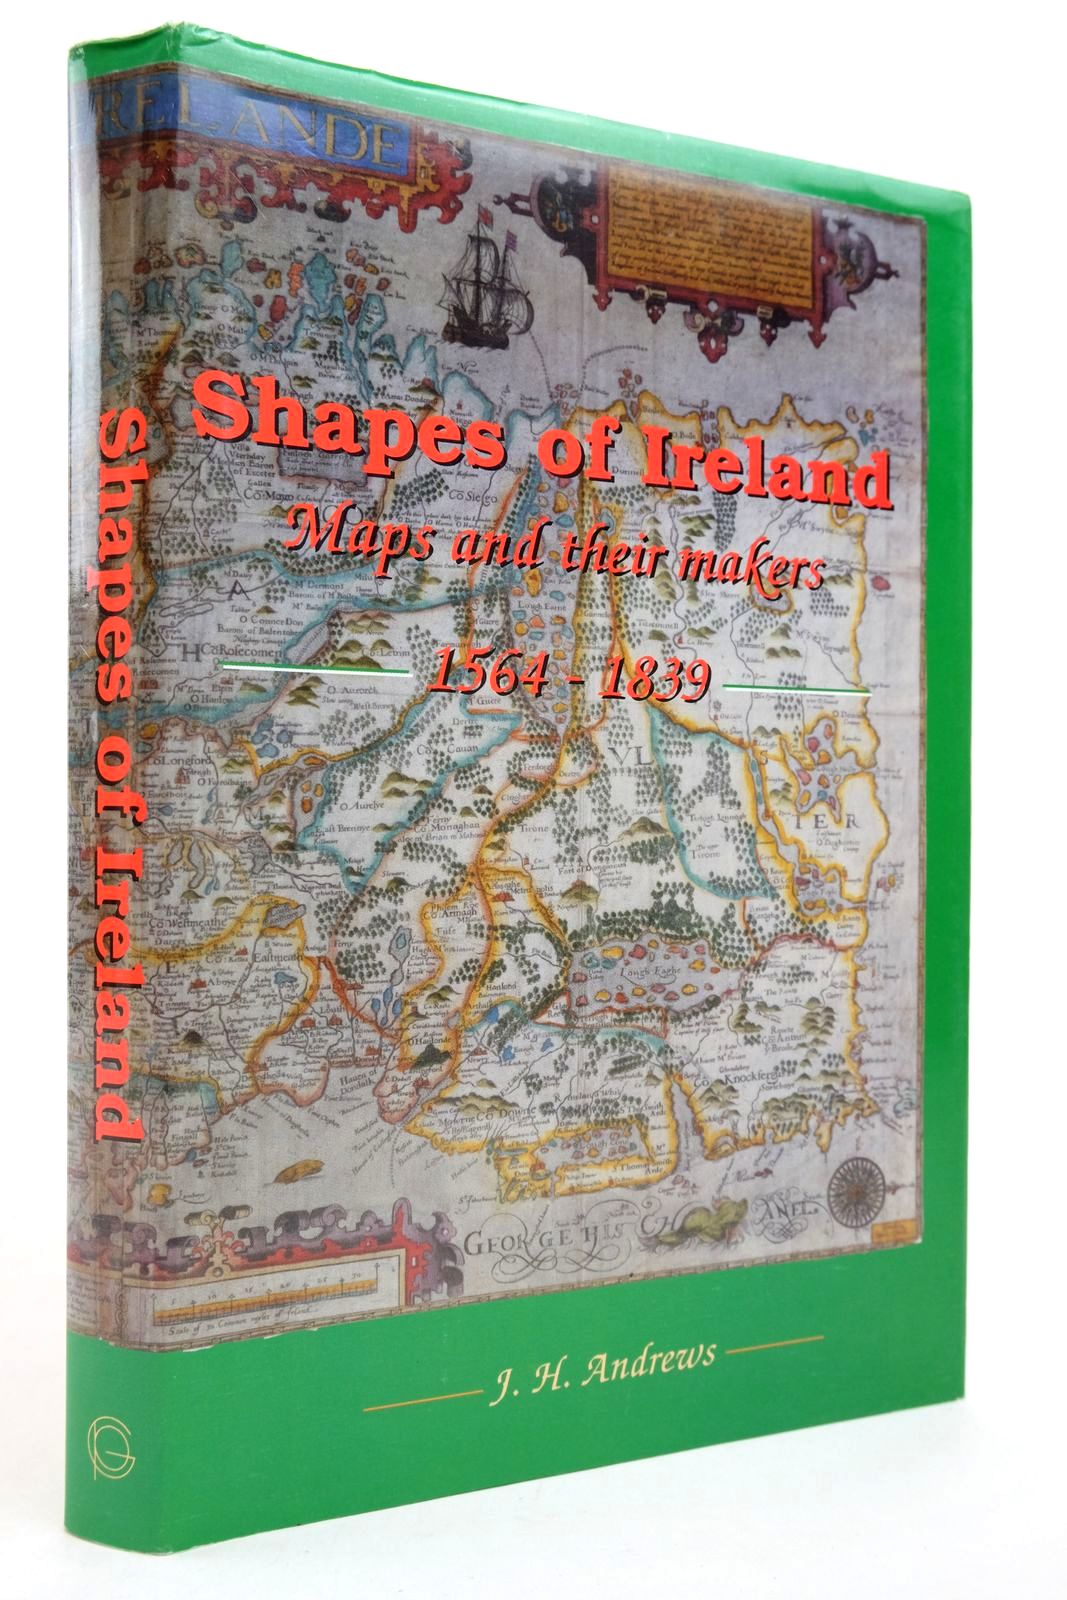 Photo of SHAPES OF IRELAND: MAPS AND THEIR MAKERS 1564-1839 written by Andrews, J.H. published by Geography Publications (STOCK CODE: 2140479)  for sale by Stella & Rose's Books